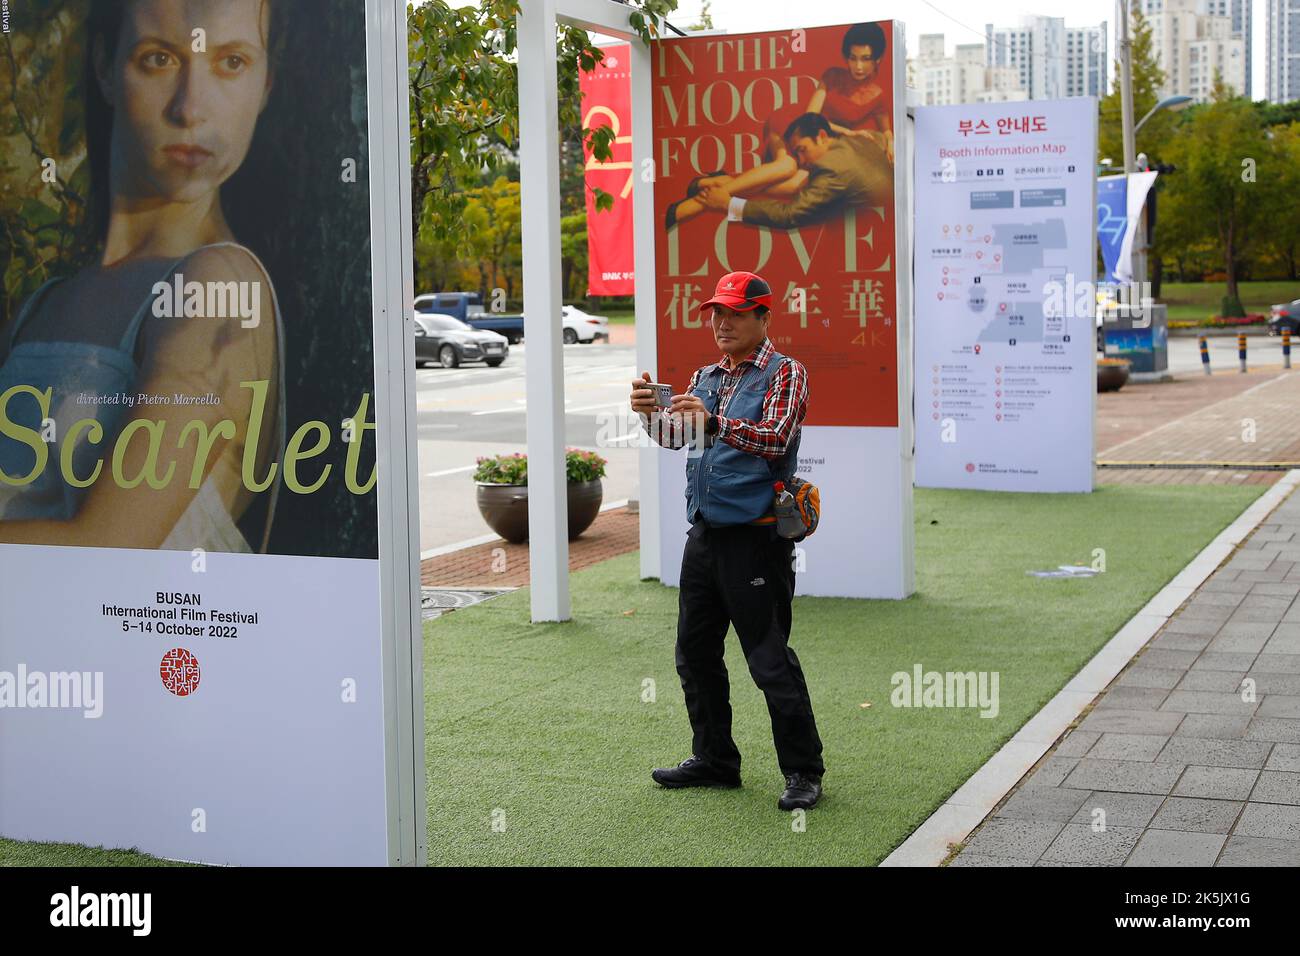 Oct 5, 2022-Busan, South Korea-Visitor take a picture a  event film poster at near cinema square in Busan, South Korea. Stock Photo